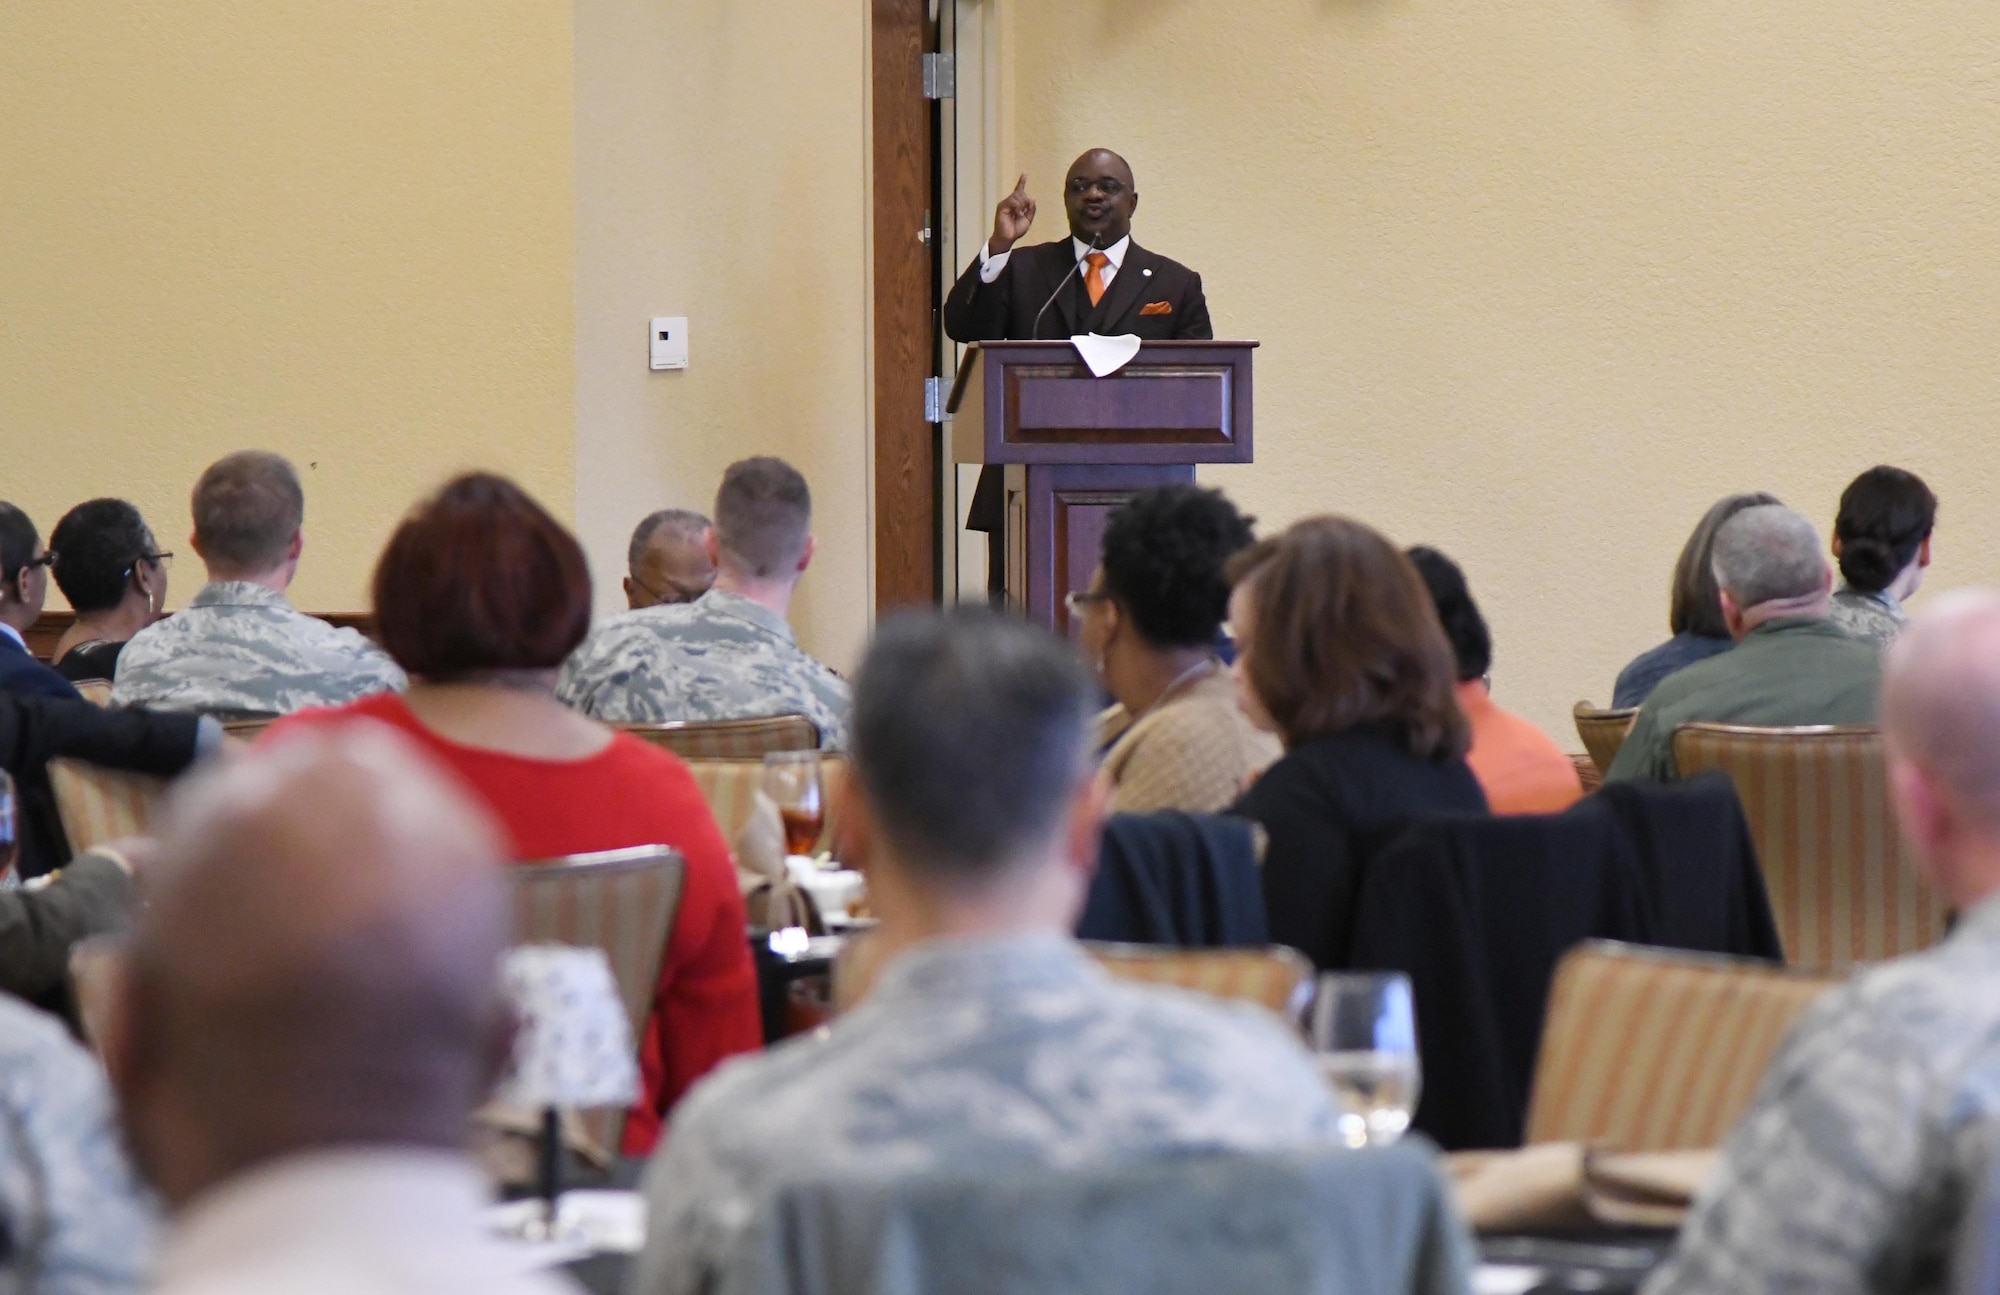 Reverend Dr. Kenneth M. Davis, speaks at the annual Dr. Martin Luther King Jr. Memorial Luncheon inside the Bay Breeze Event Center at Keesler Air Force Base, Mississippi, Jan. 15, 2019. The 81st Training Wing and Wing Staff Agencies hosted the event honoring King's legacy and his efforts to inspire civil rights activism within the African-American community. In 1994, Congress designated the Martin Luther King Jr. Federal Holiday a national day of service and charged the Corporation for National and Community Service with leading the effort. (U.S. Air Force photo by Kemberly Groue)